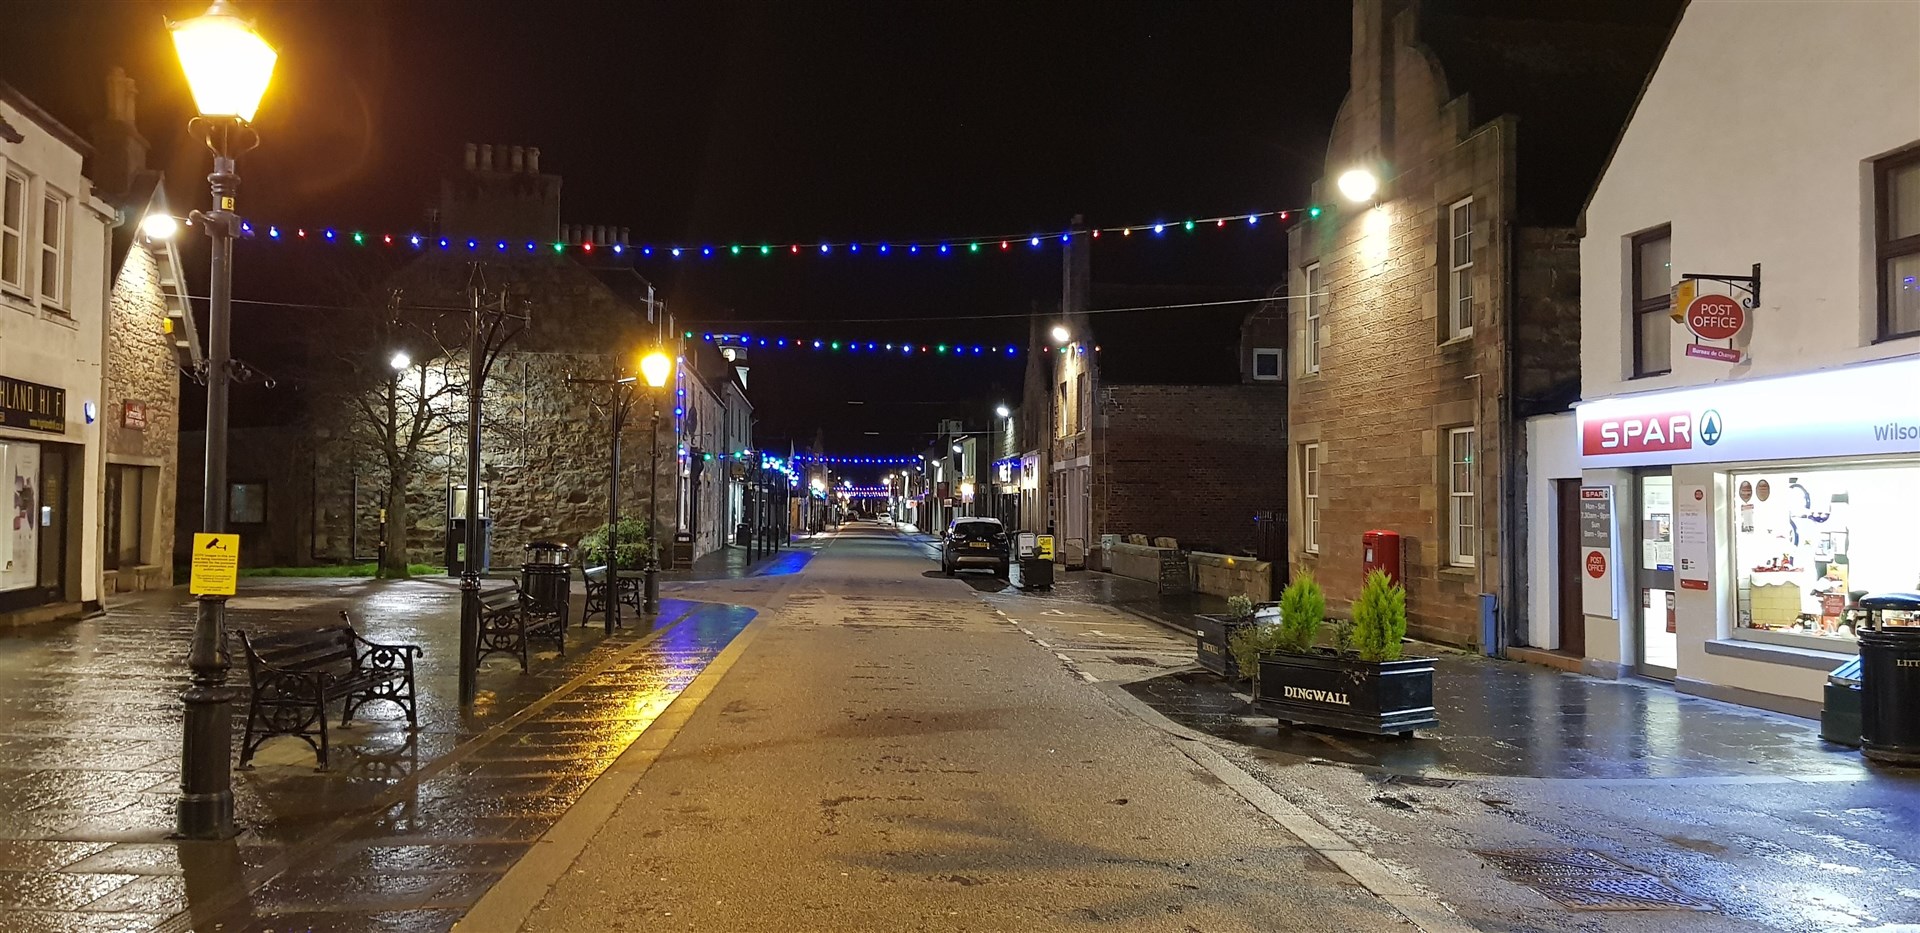 Christmas lights on Dingwall High Street were thin on the ground after concerns over maintenance of wiring and fixings needed to support them.